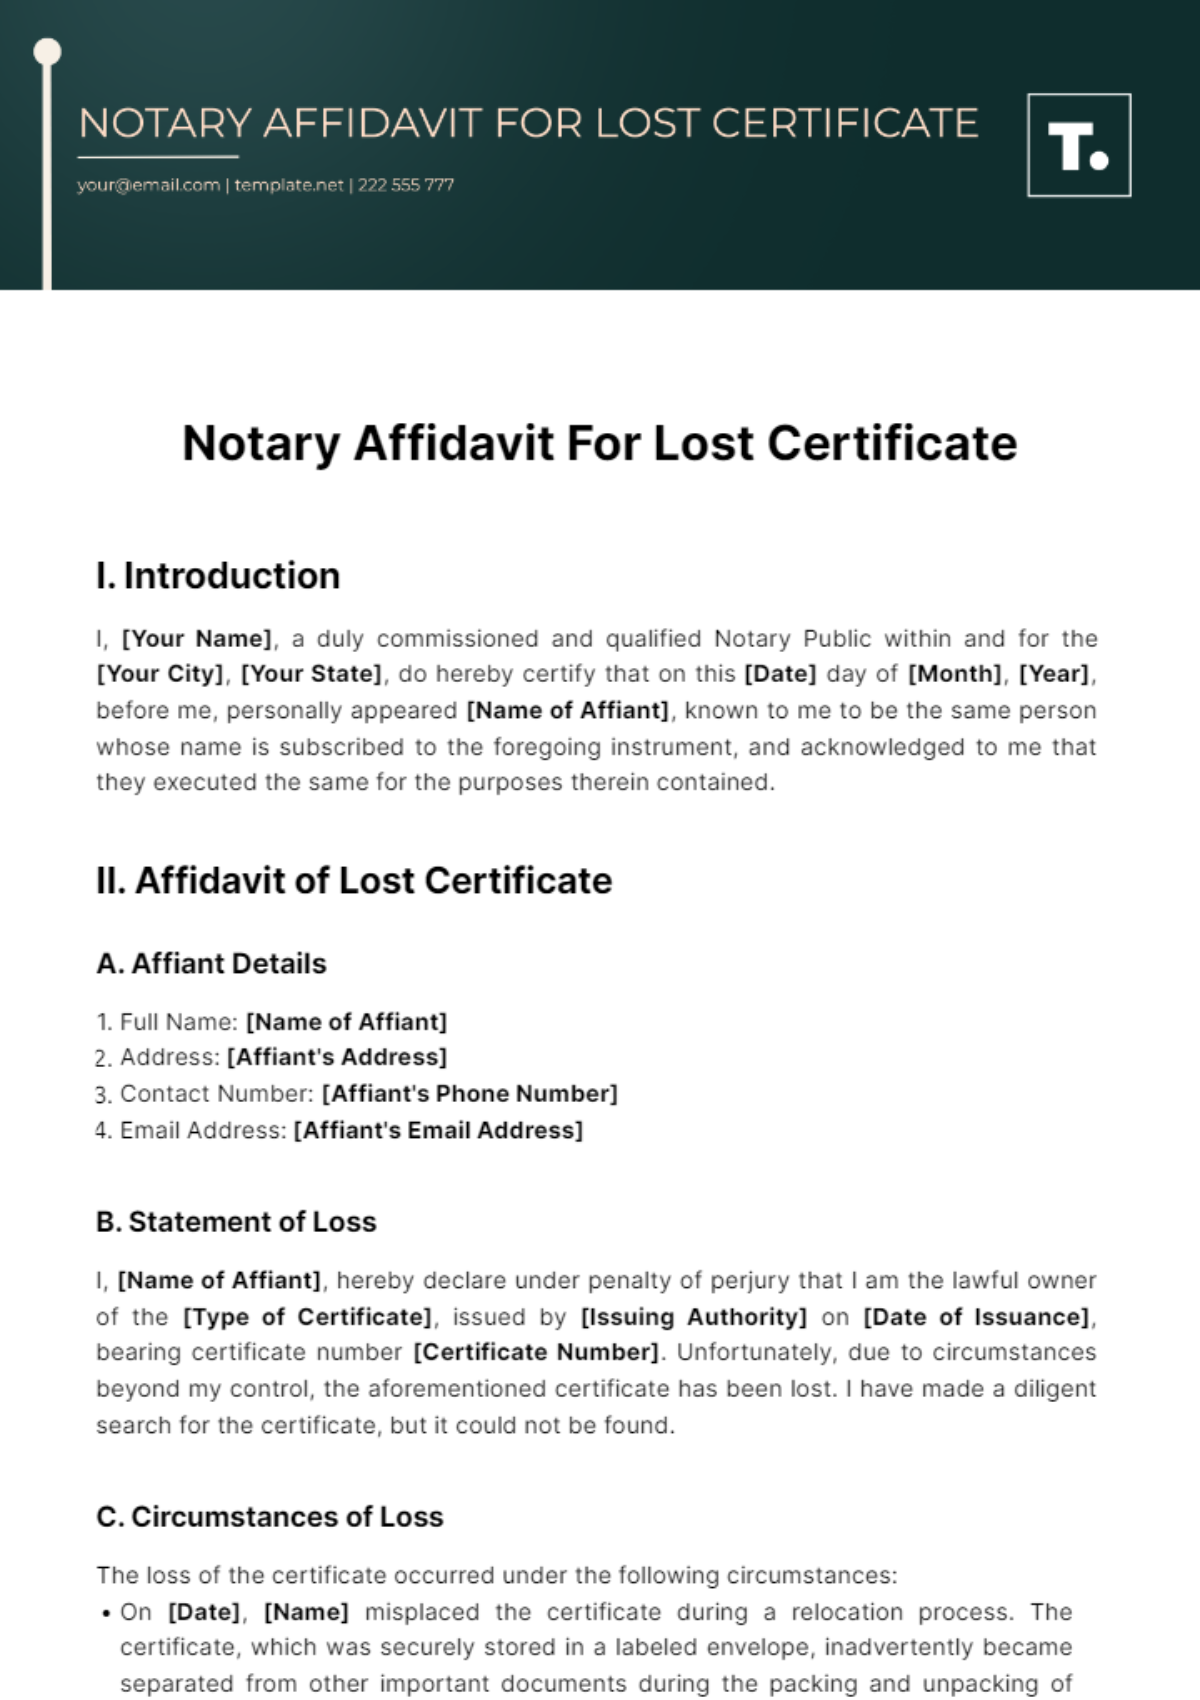 Free Notary Affidavit For Lost Certificate Template